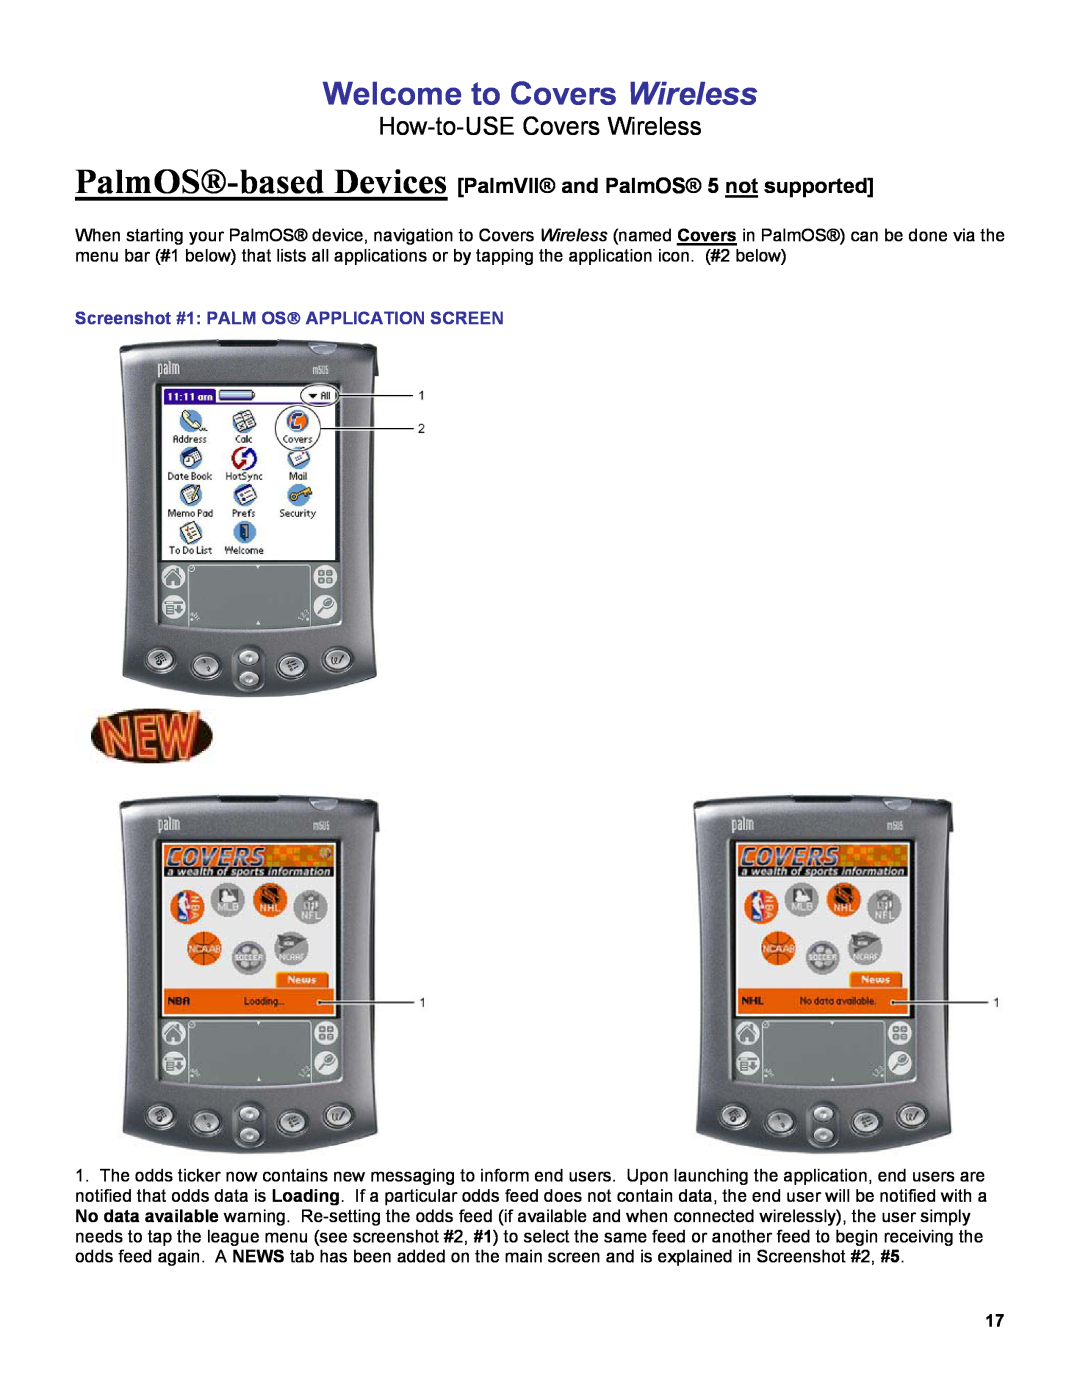 Palm OS Devices manual How-to-USE Covers Wireless, Screenshot #1 PALM OS APPLICATION SCREEN, Welcome to Covers Wireless 